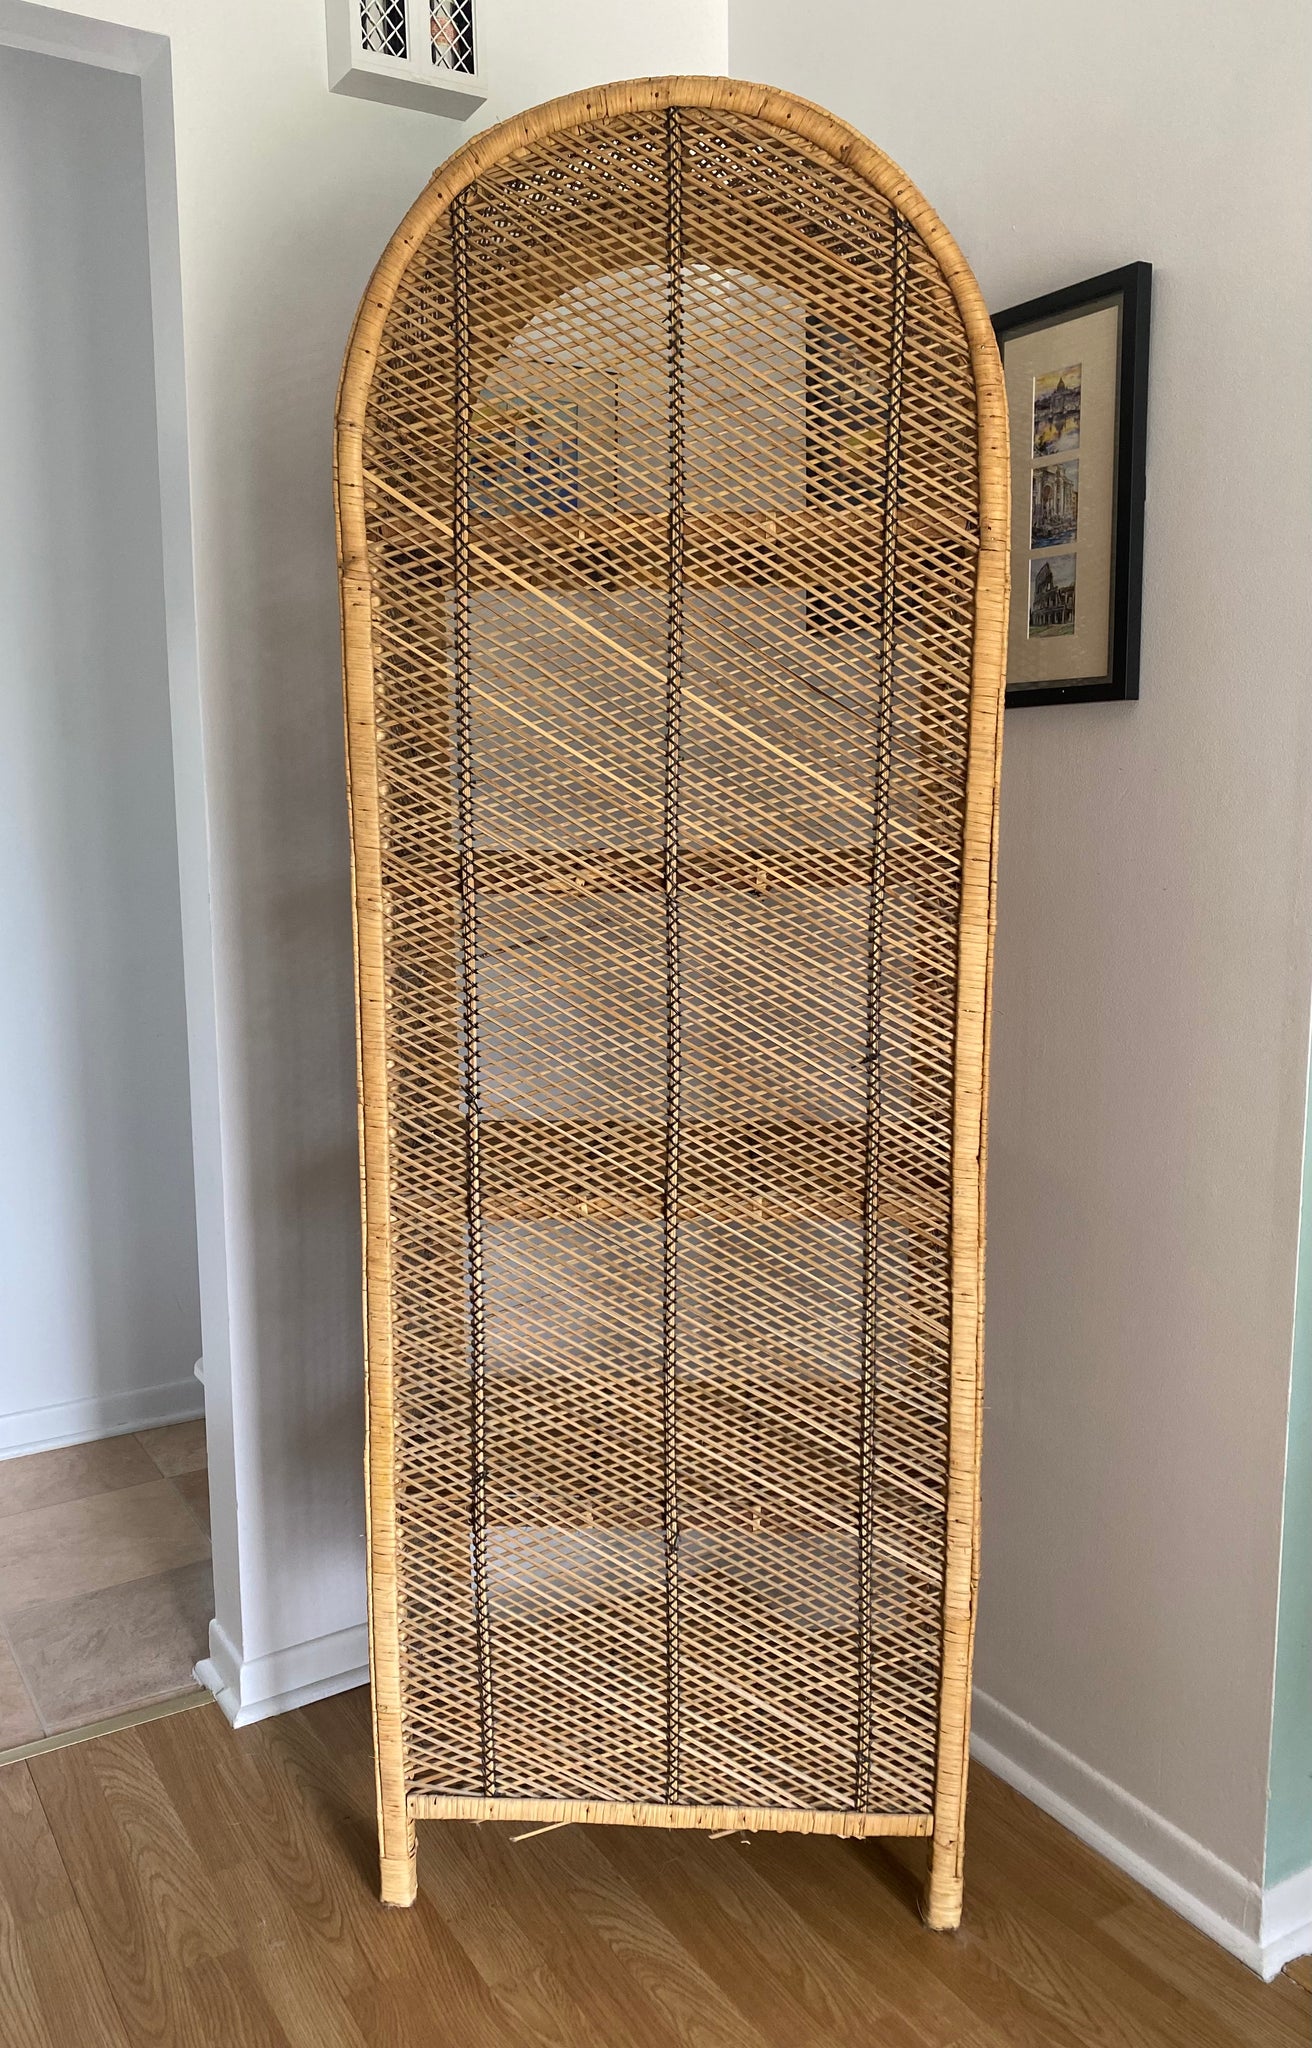 Very tall arched wicker étagère